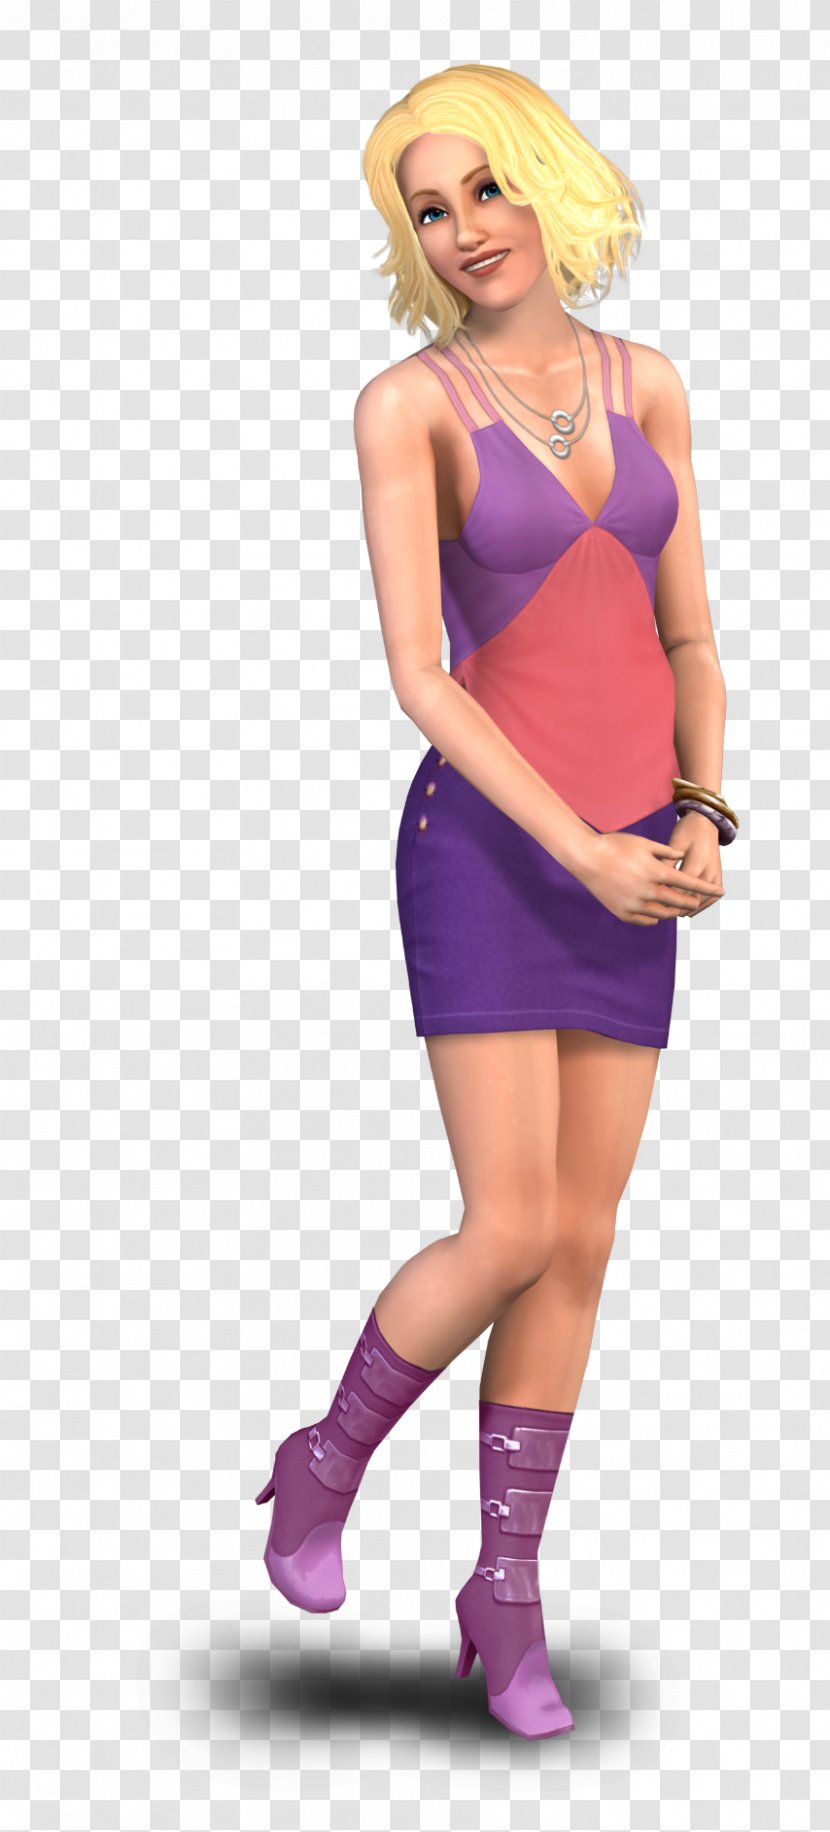 The Sims 3: Late Night 4 Xbox 360 - Tree Transparent PNG